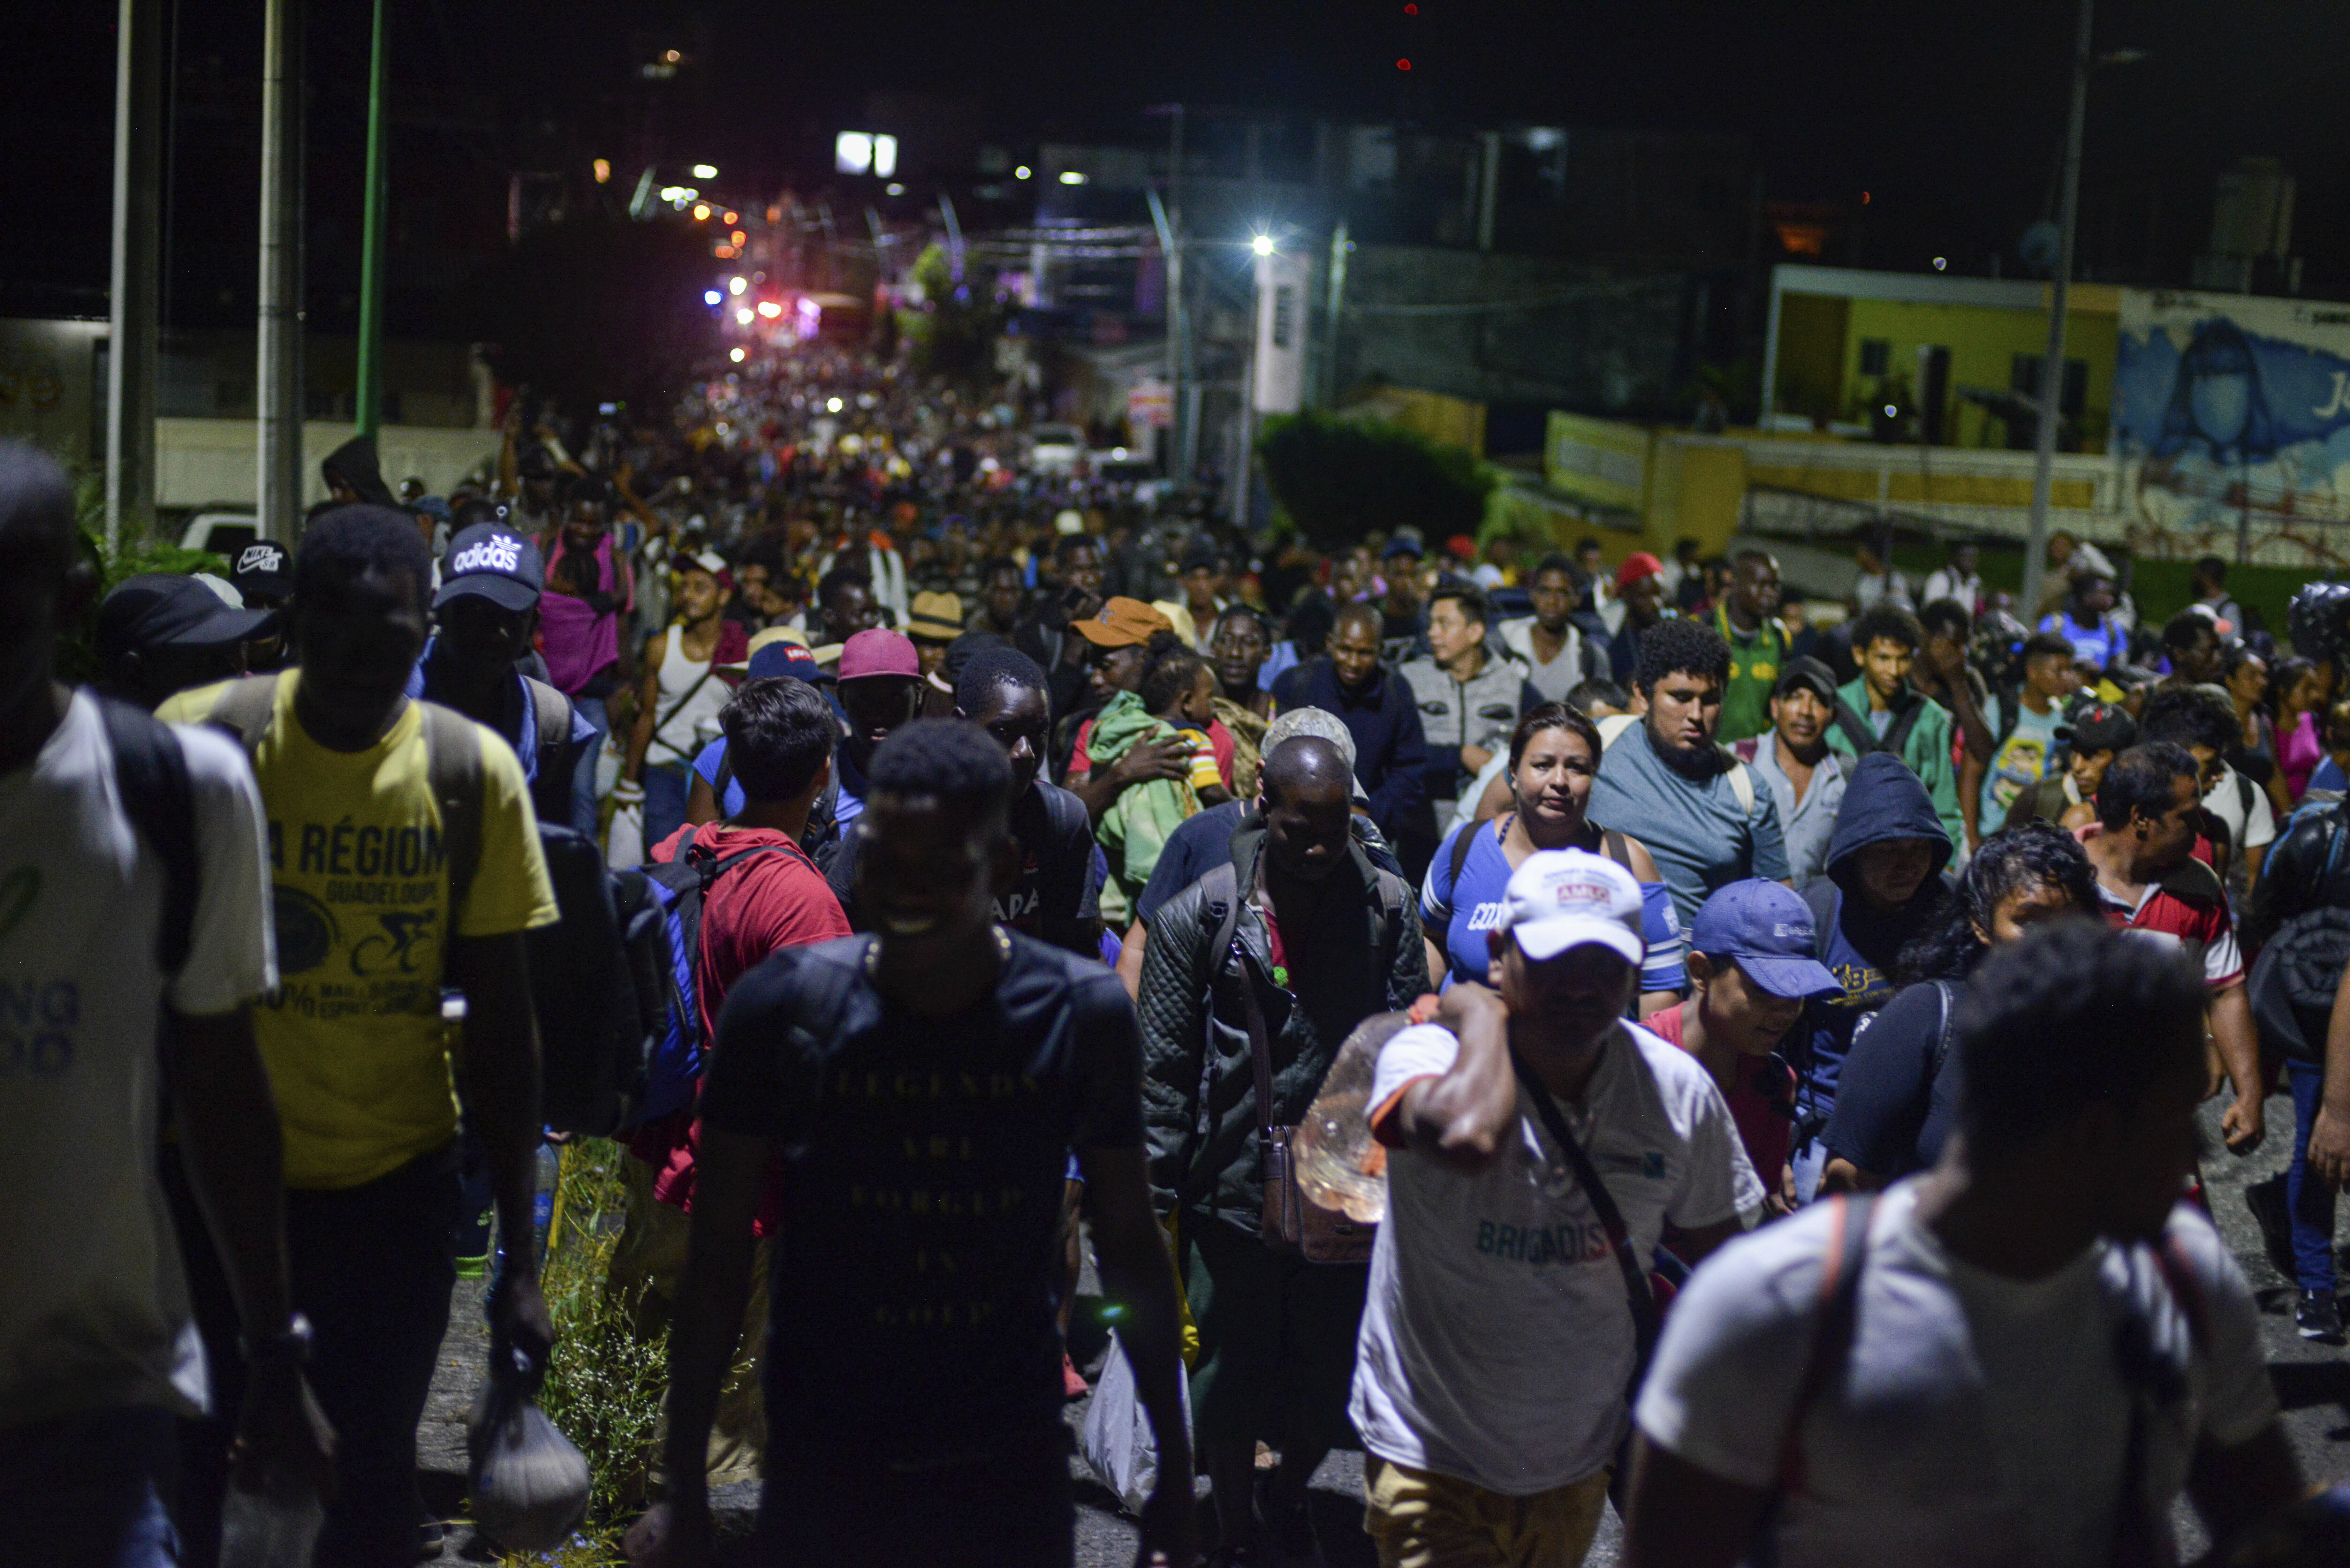 Migrants depart early in the morning from Tapachula, Chiapas state, Mexico, Saturday Oct. 12, 2019. Migrants from Africa, Cuba, Haiti, and other Central American countries set off early morning by foot from Tapachula to the southern border of the United States. (AP Photo/Isabel Mateos)